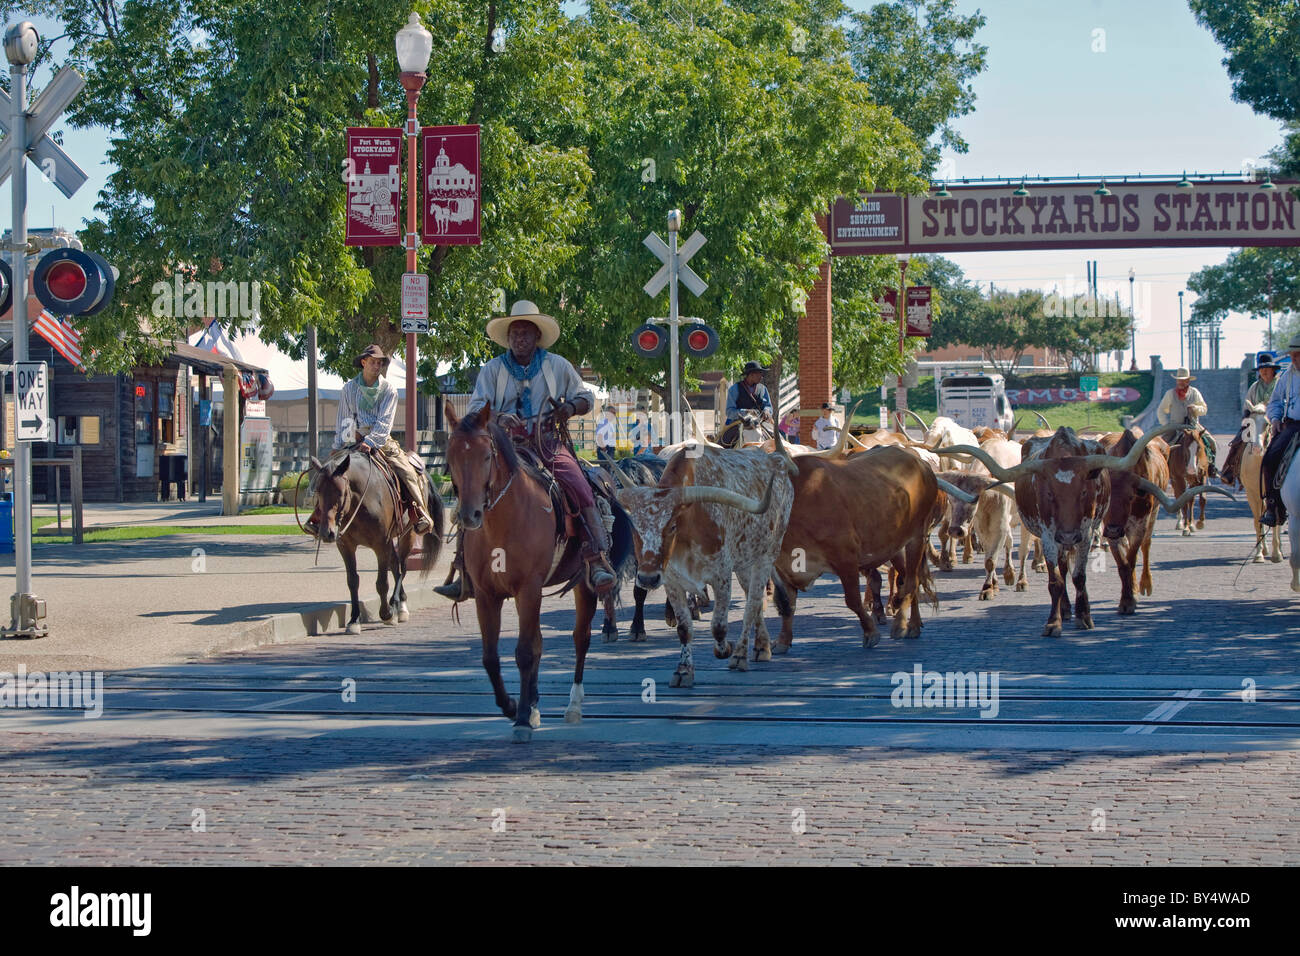 Longhorn steers are herded together for their twice daily 'cattle drive' in the Stockyard district of Ft. Worth, Texas Stock Photo